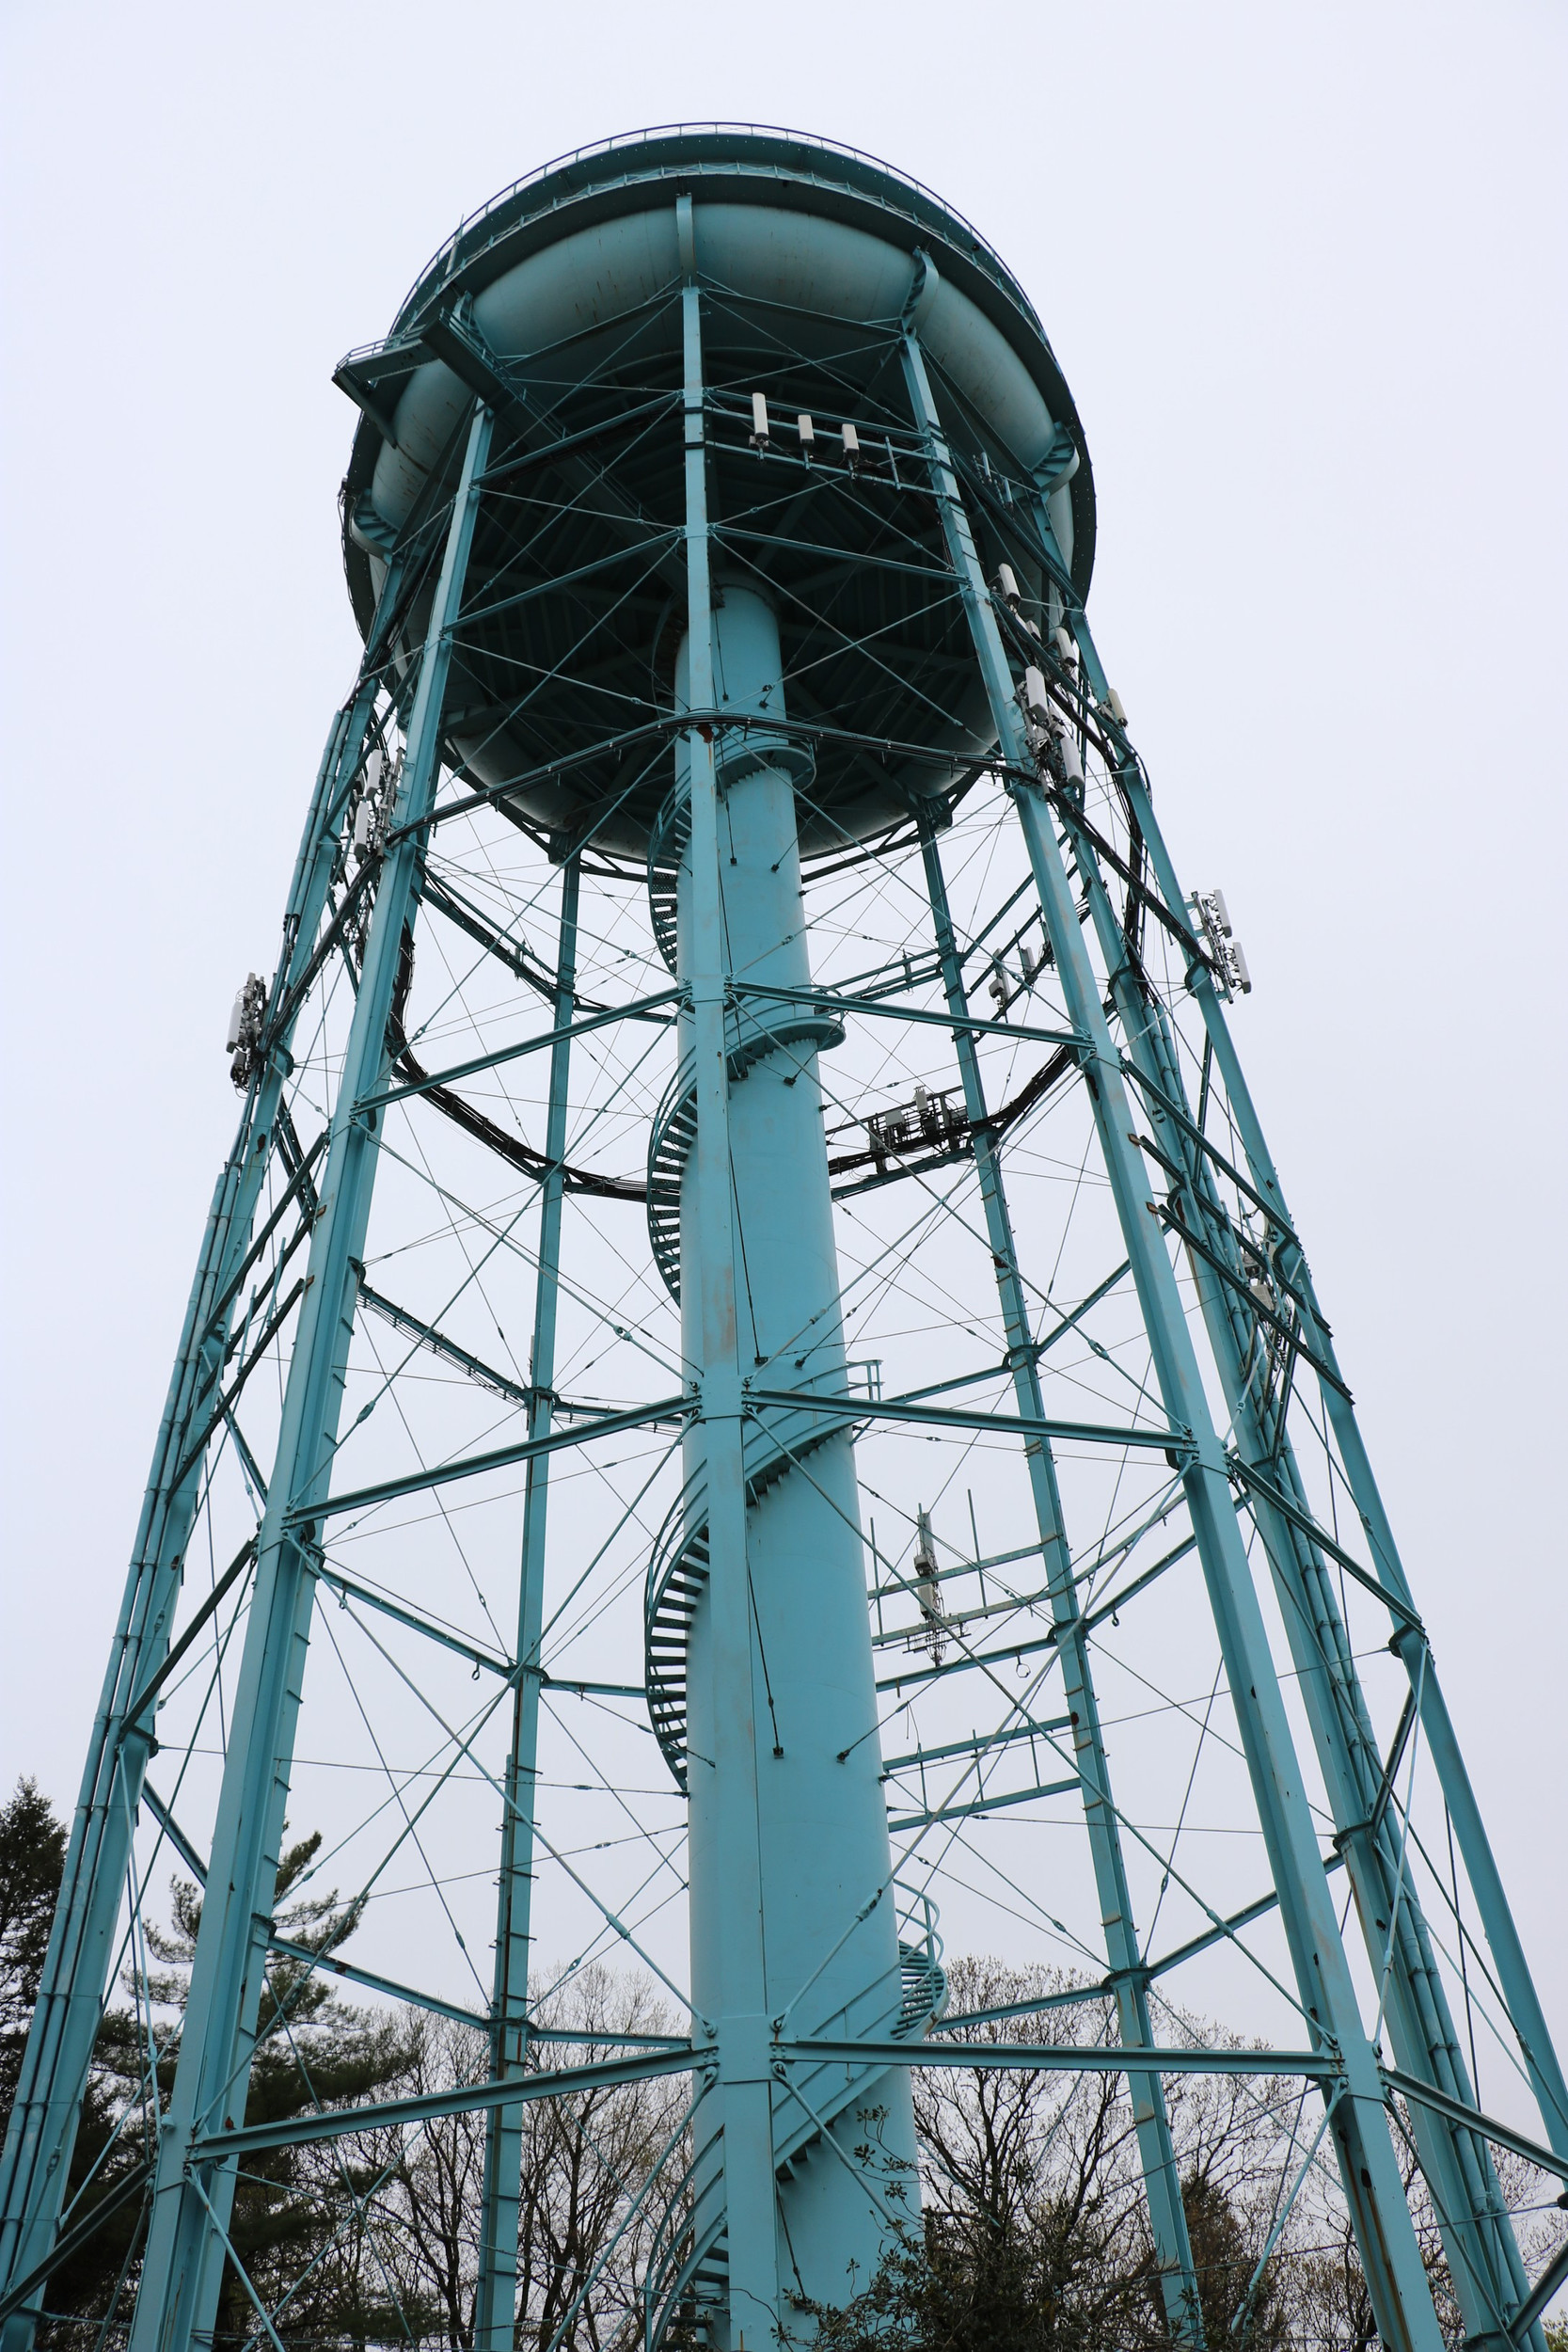 The water tower, last painted in 1995, has an approximate life span of 80 years.